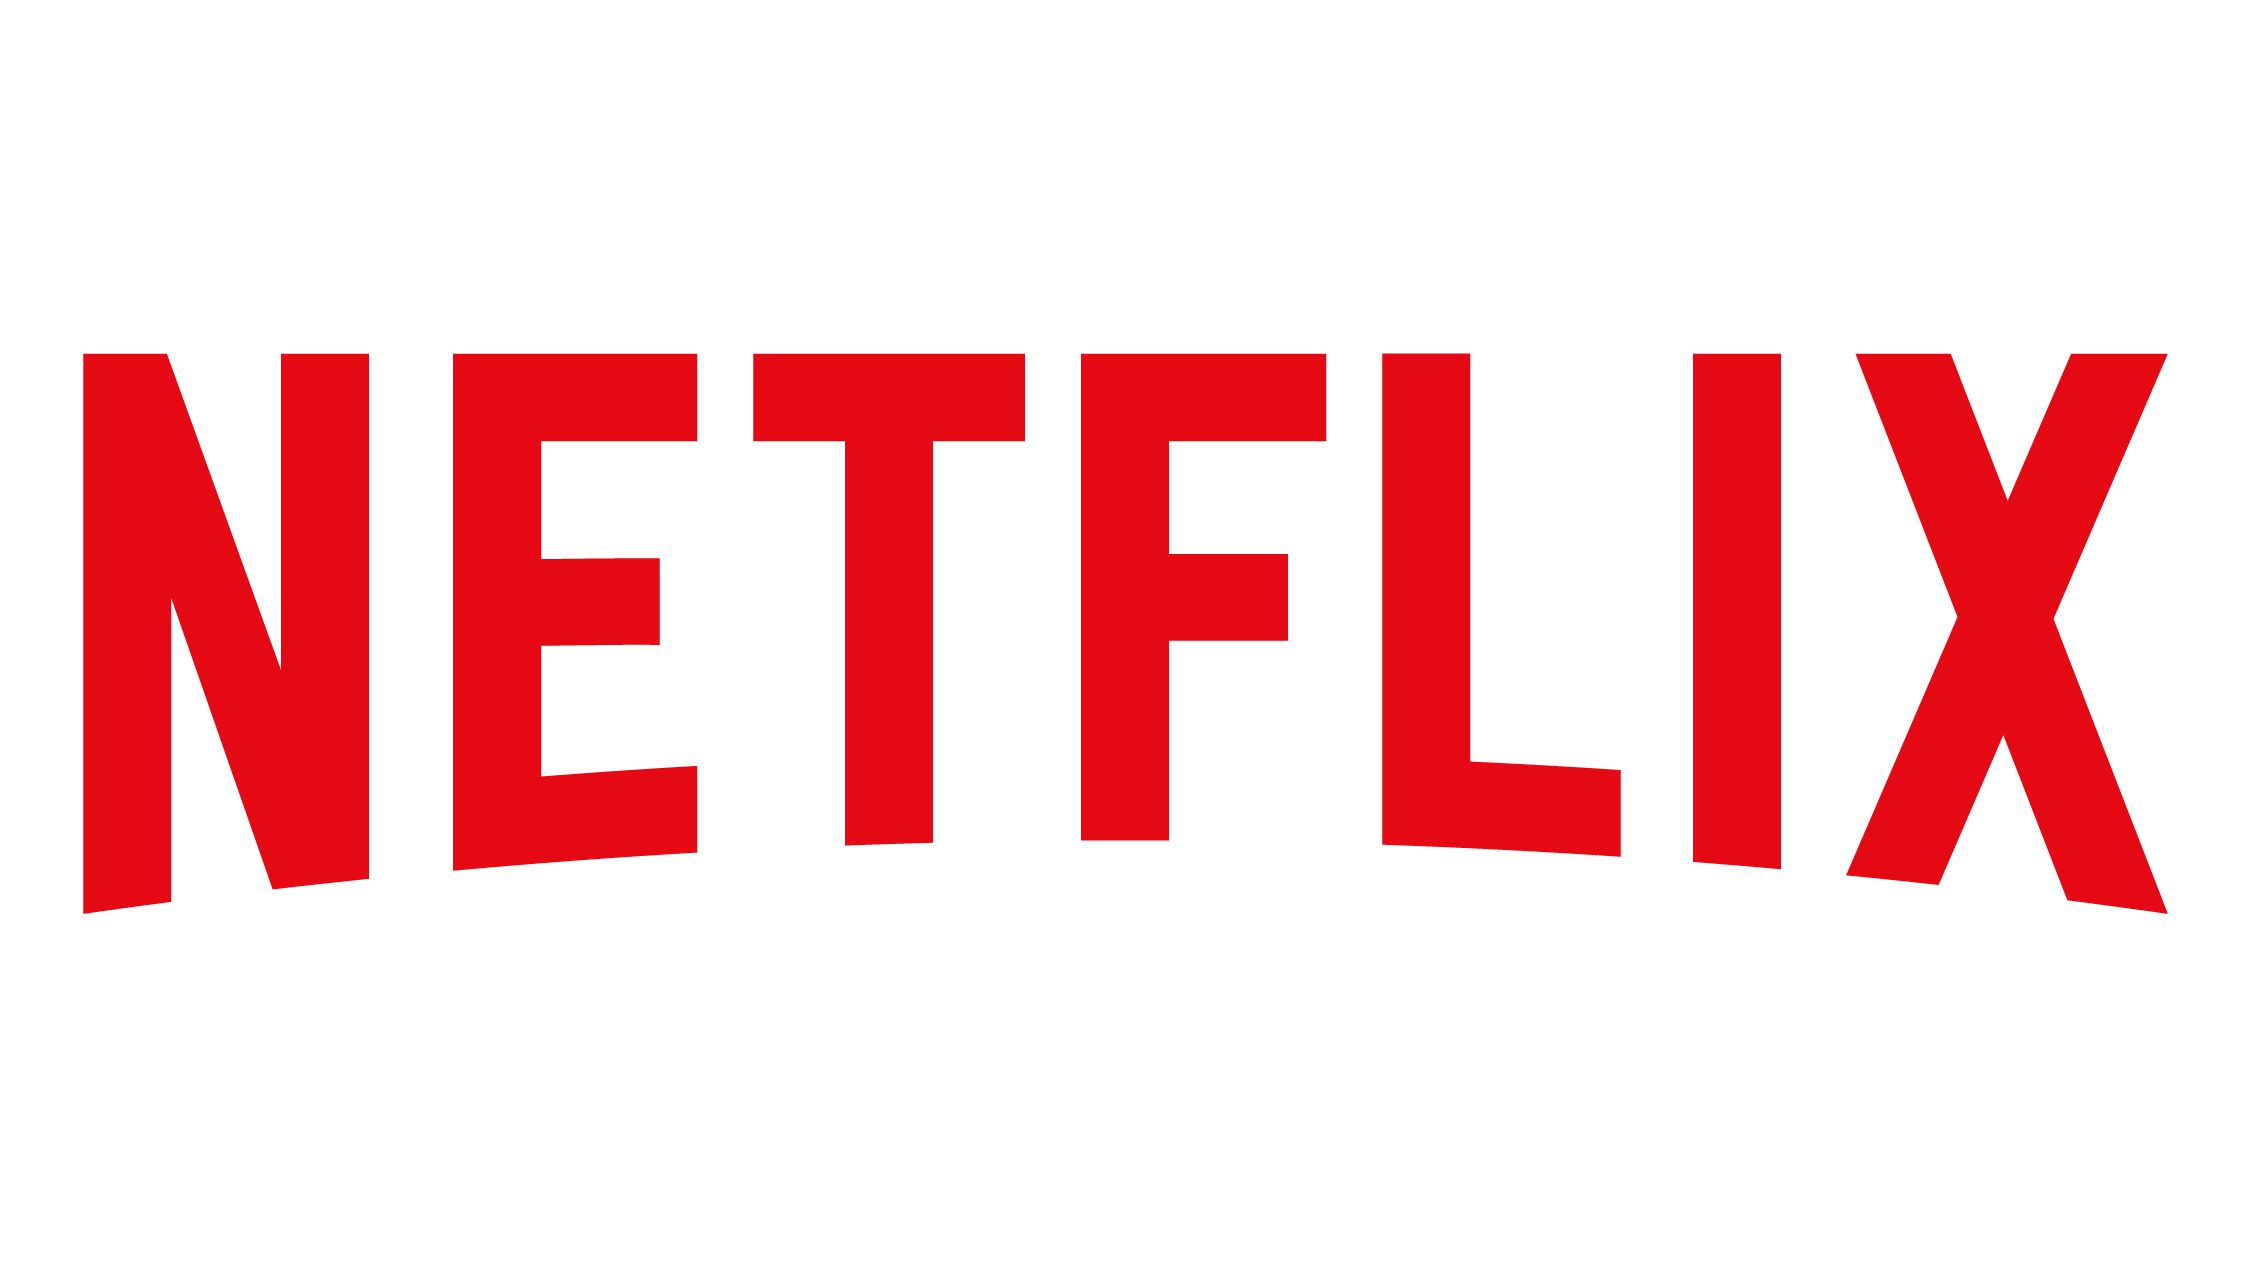 Netflix today updated the prices for its streaming plans, and all of its offerings are now more expensive. The Basic plan is now priced at $9.99 per m